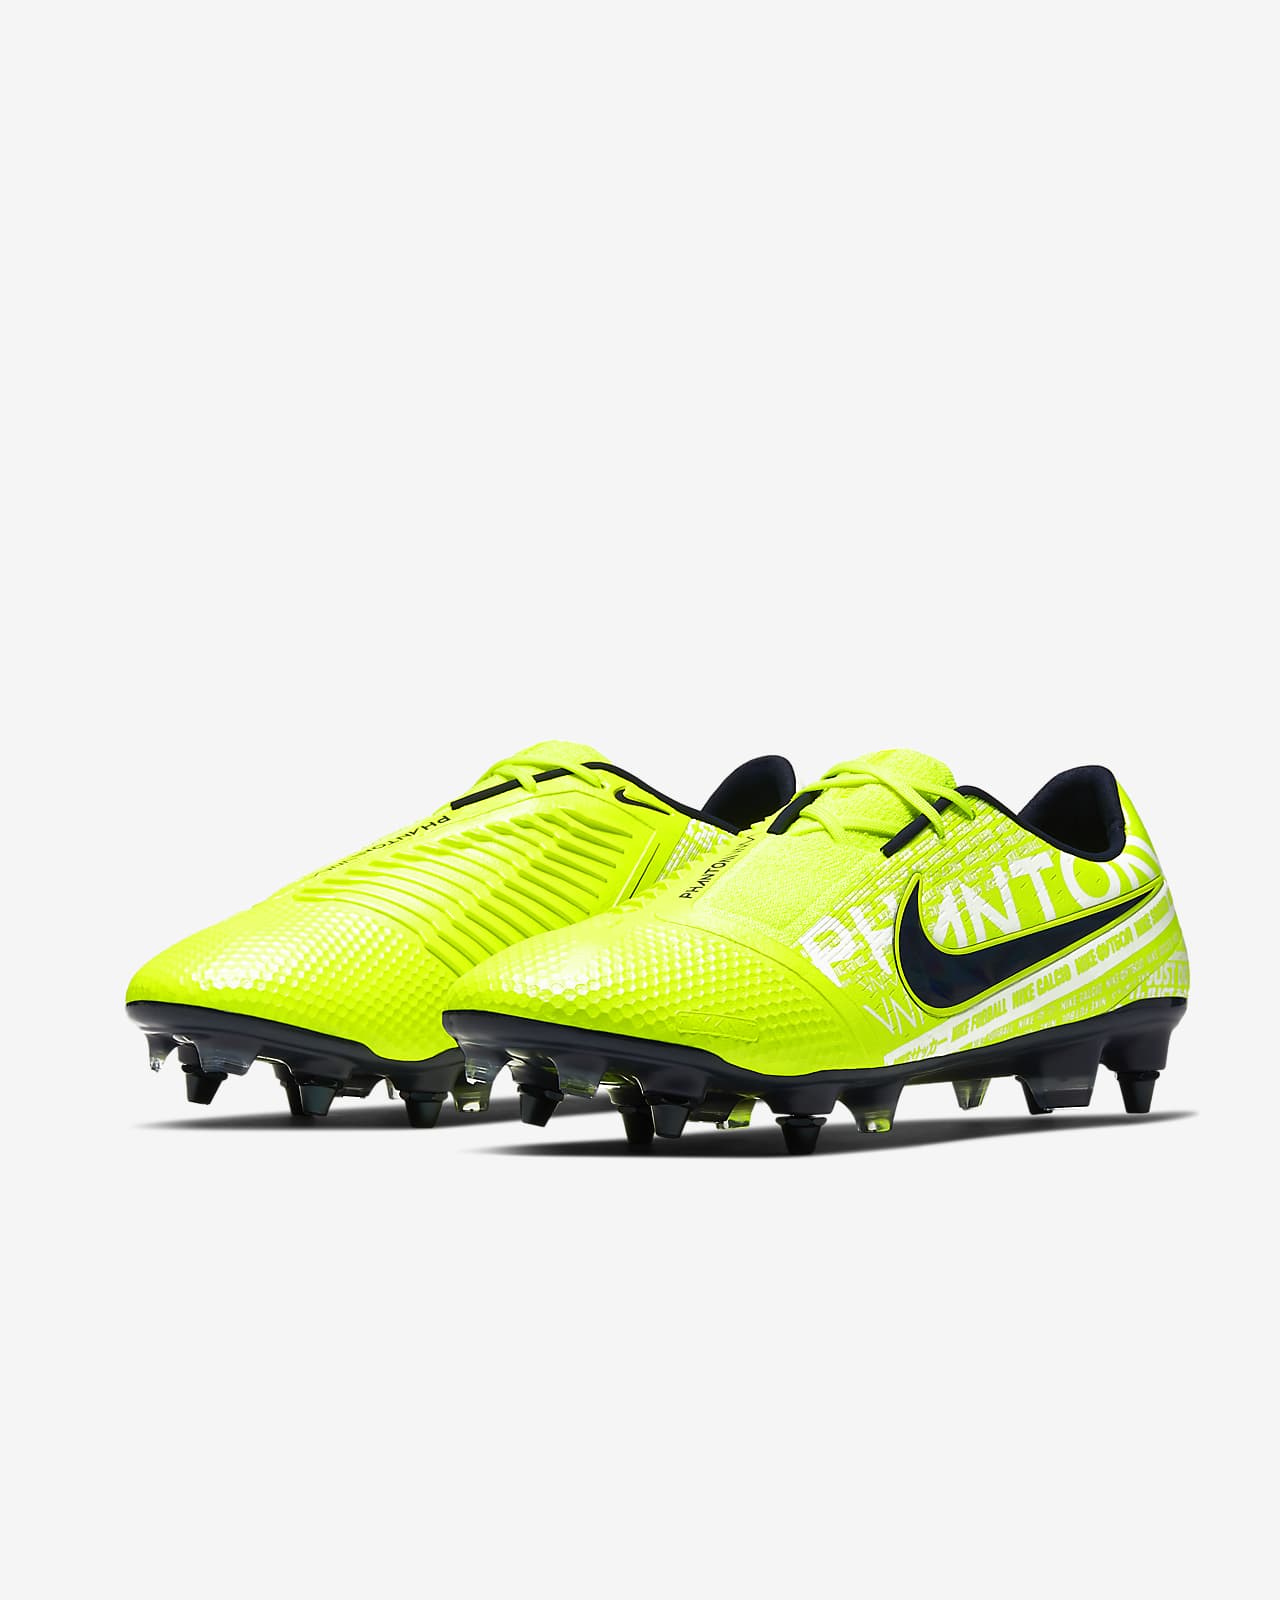 nike soft ground boots